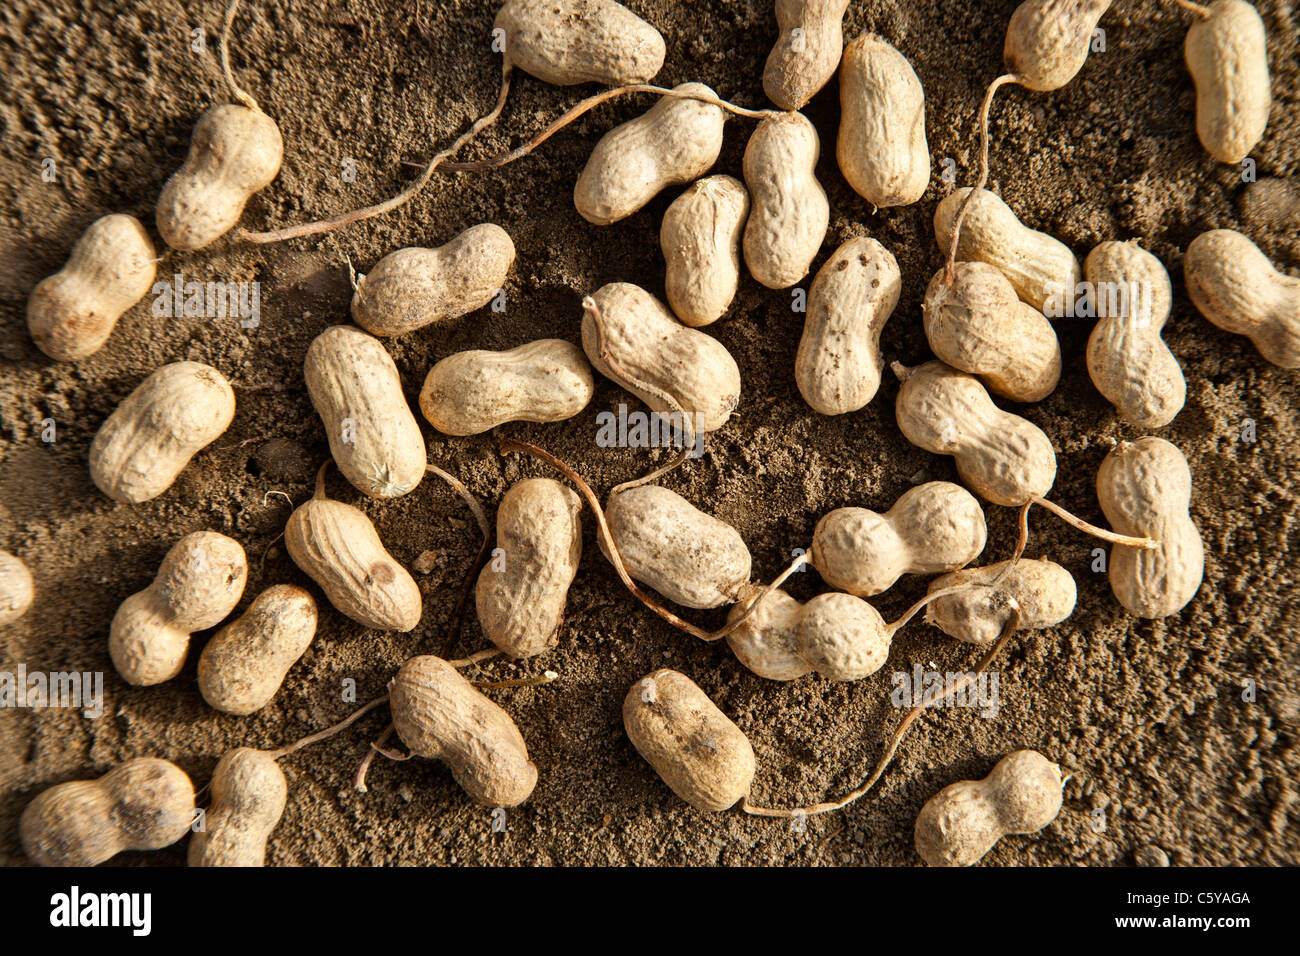 Harvested peanuts drying Stock Photo